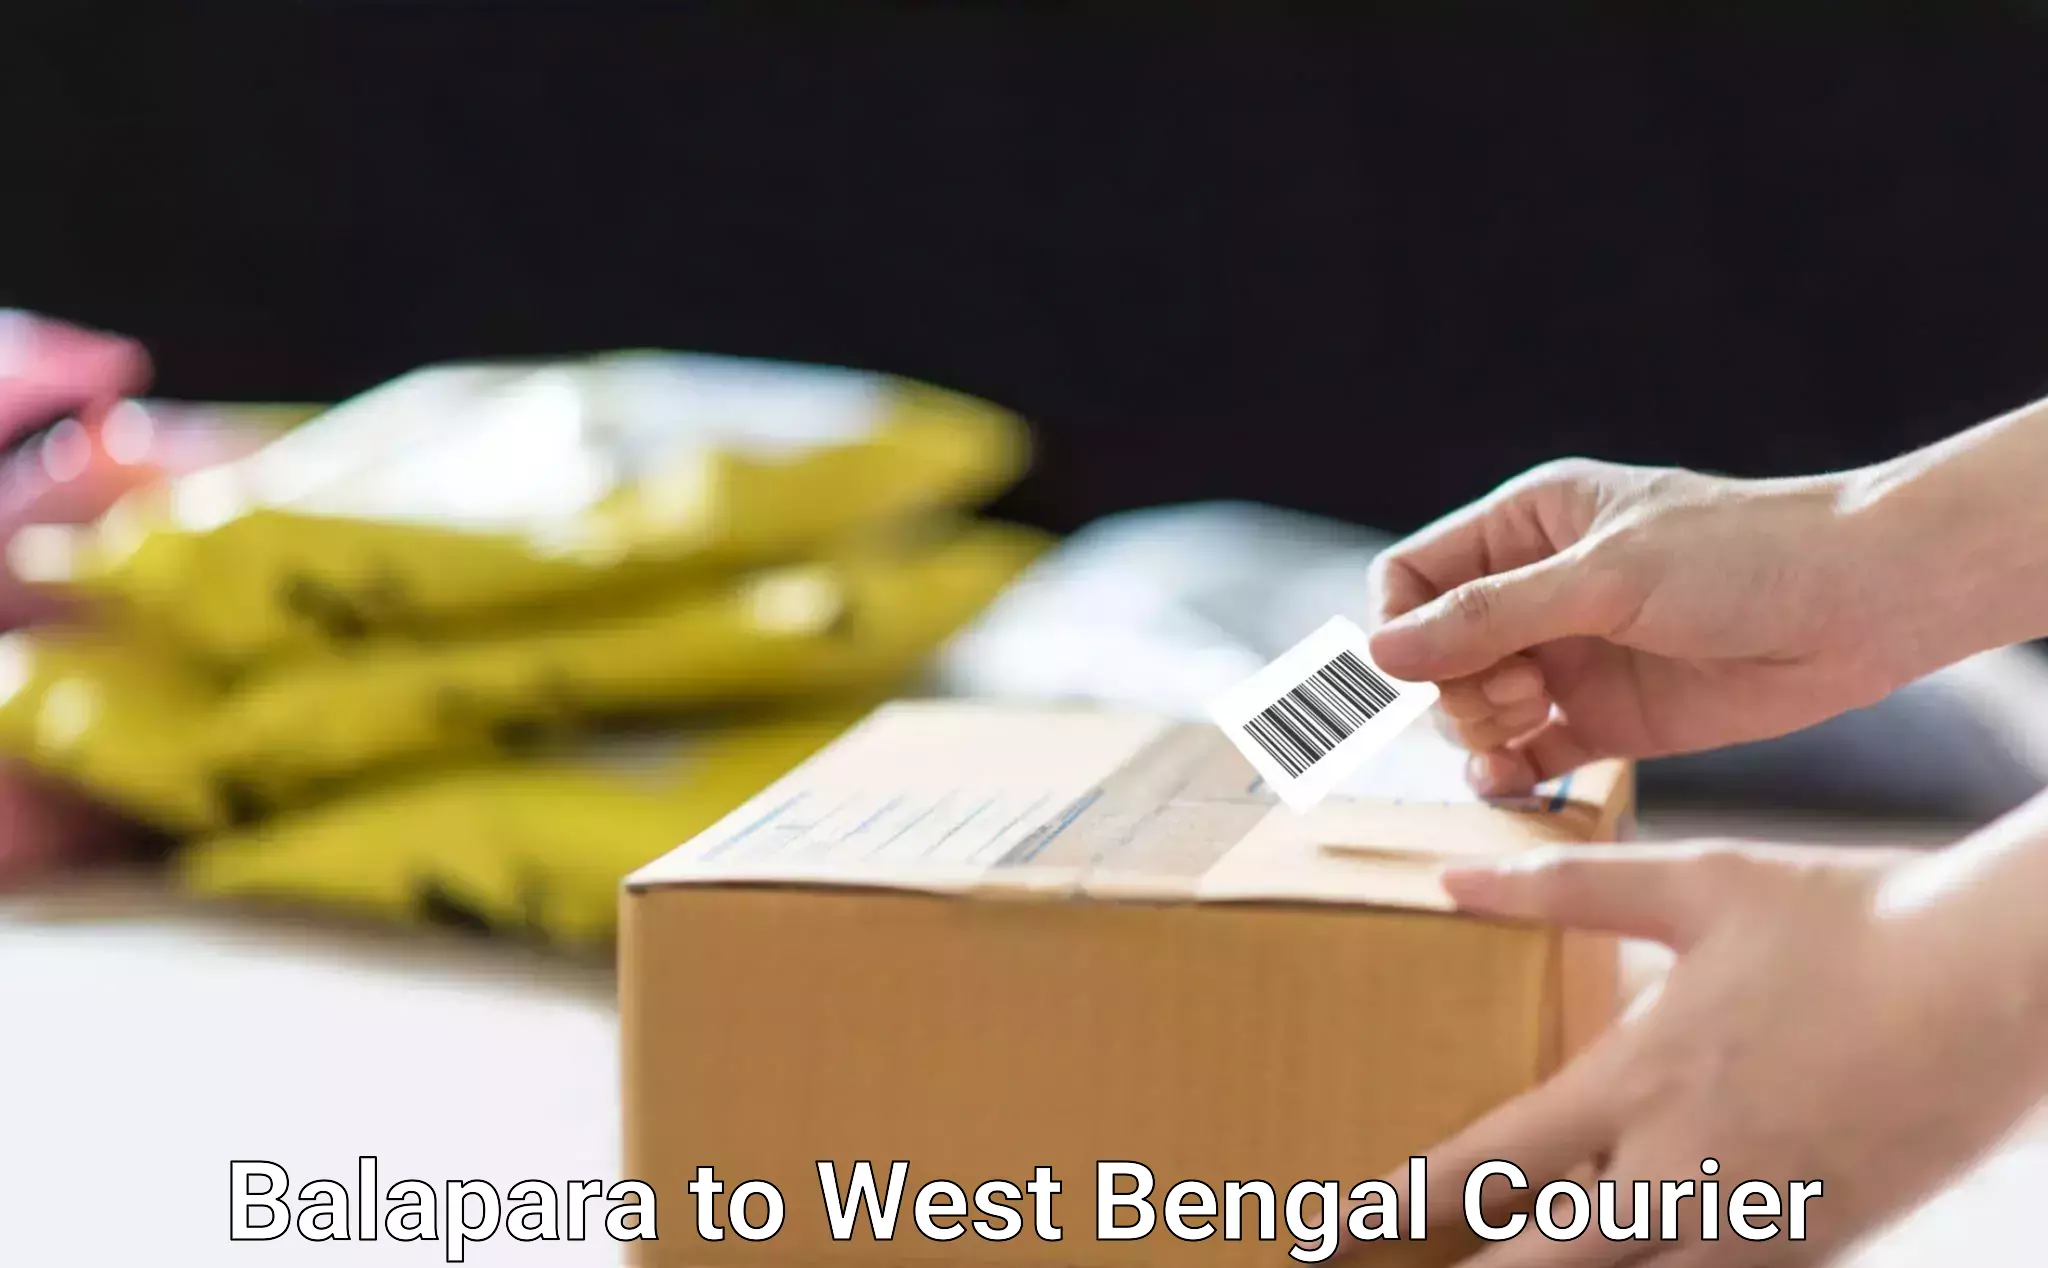 State-of-the-art courier technology Balapara to West Bengal